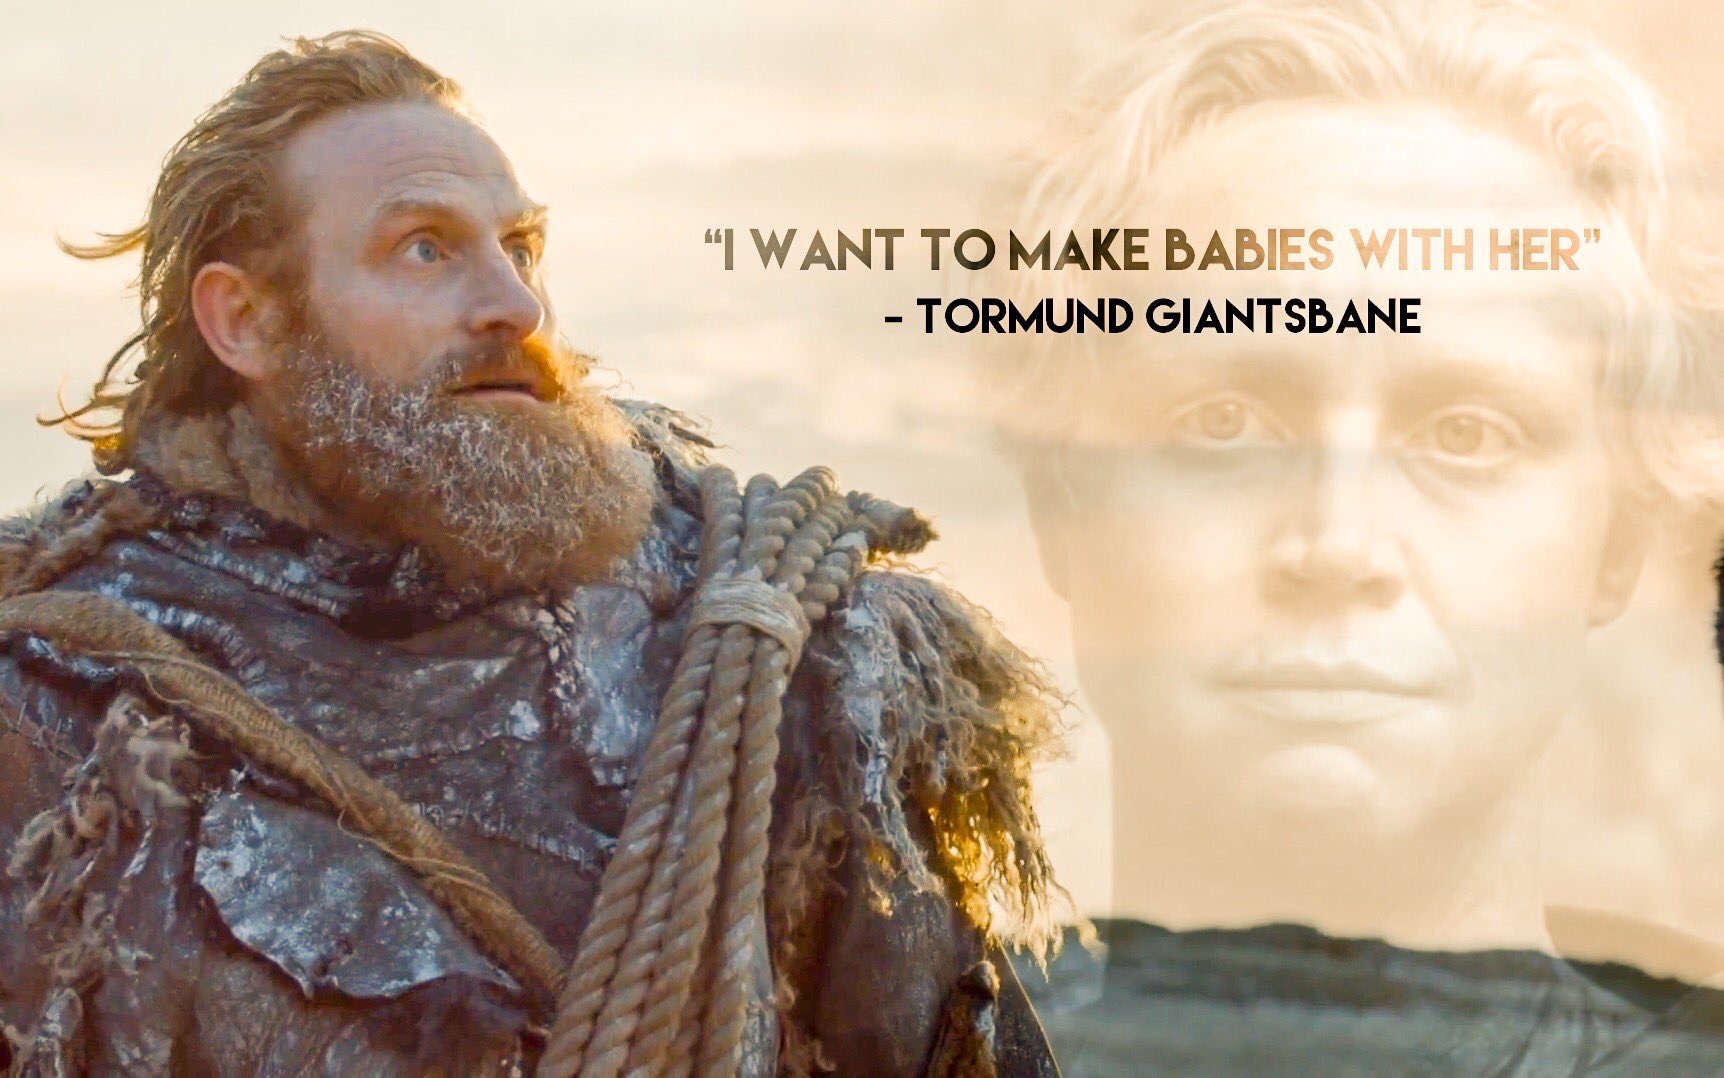 want to make babies with her - "I Want To Make Babies With Her" Tormund Giantsbane